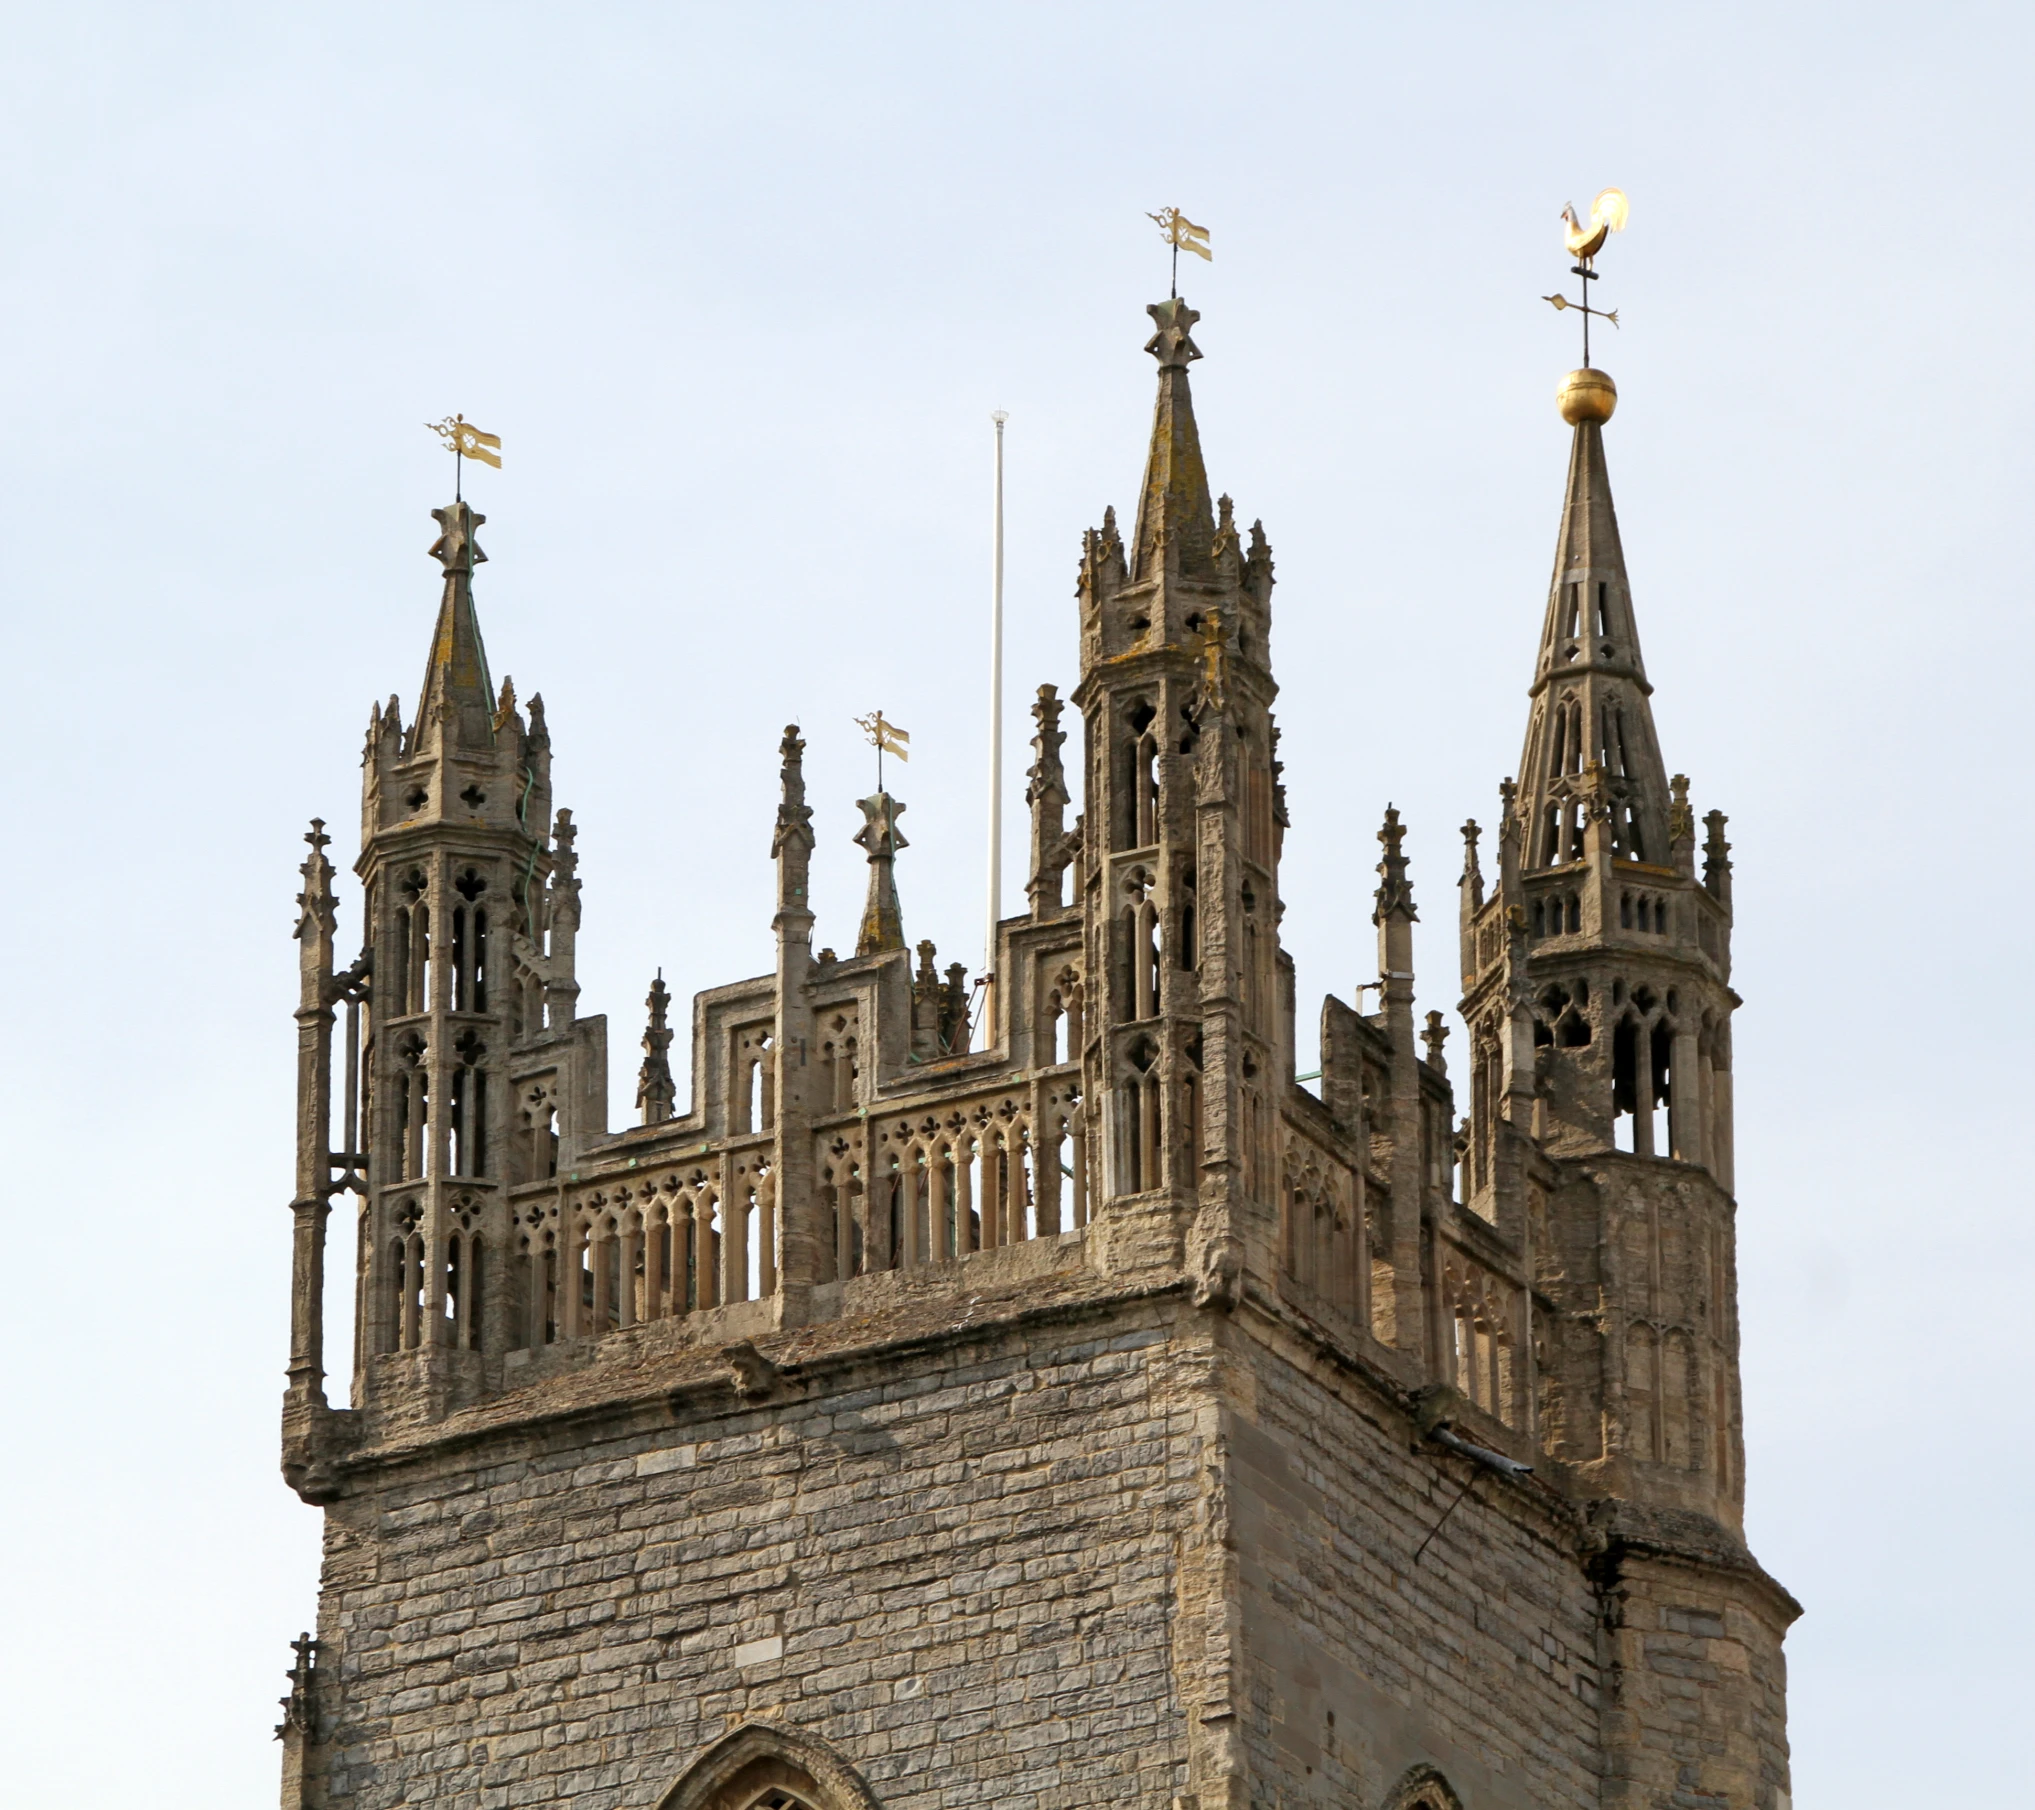 a tall clock tower with spires and flags